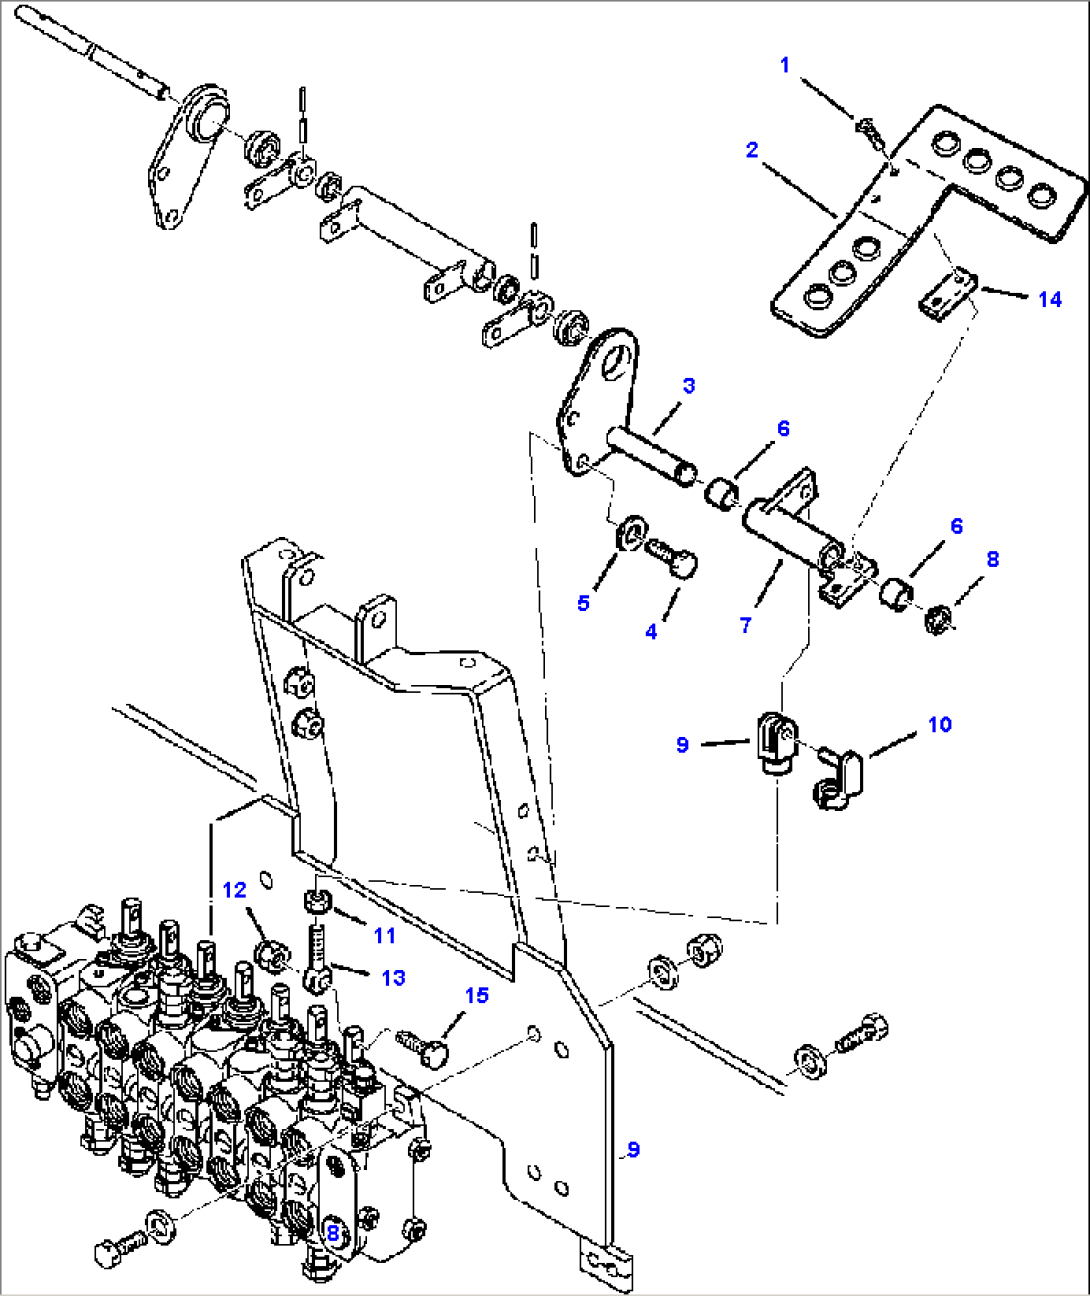 FIG. K4530-01A0 RIGHT BACKHOE CONTROL PEDAL - BACKHOE STYLE